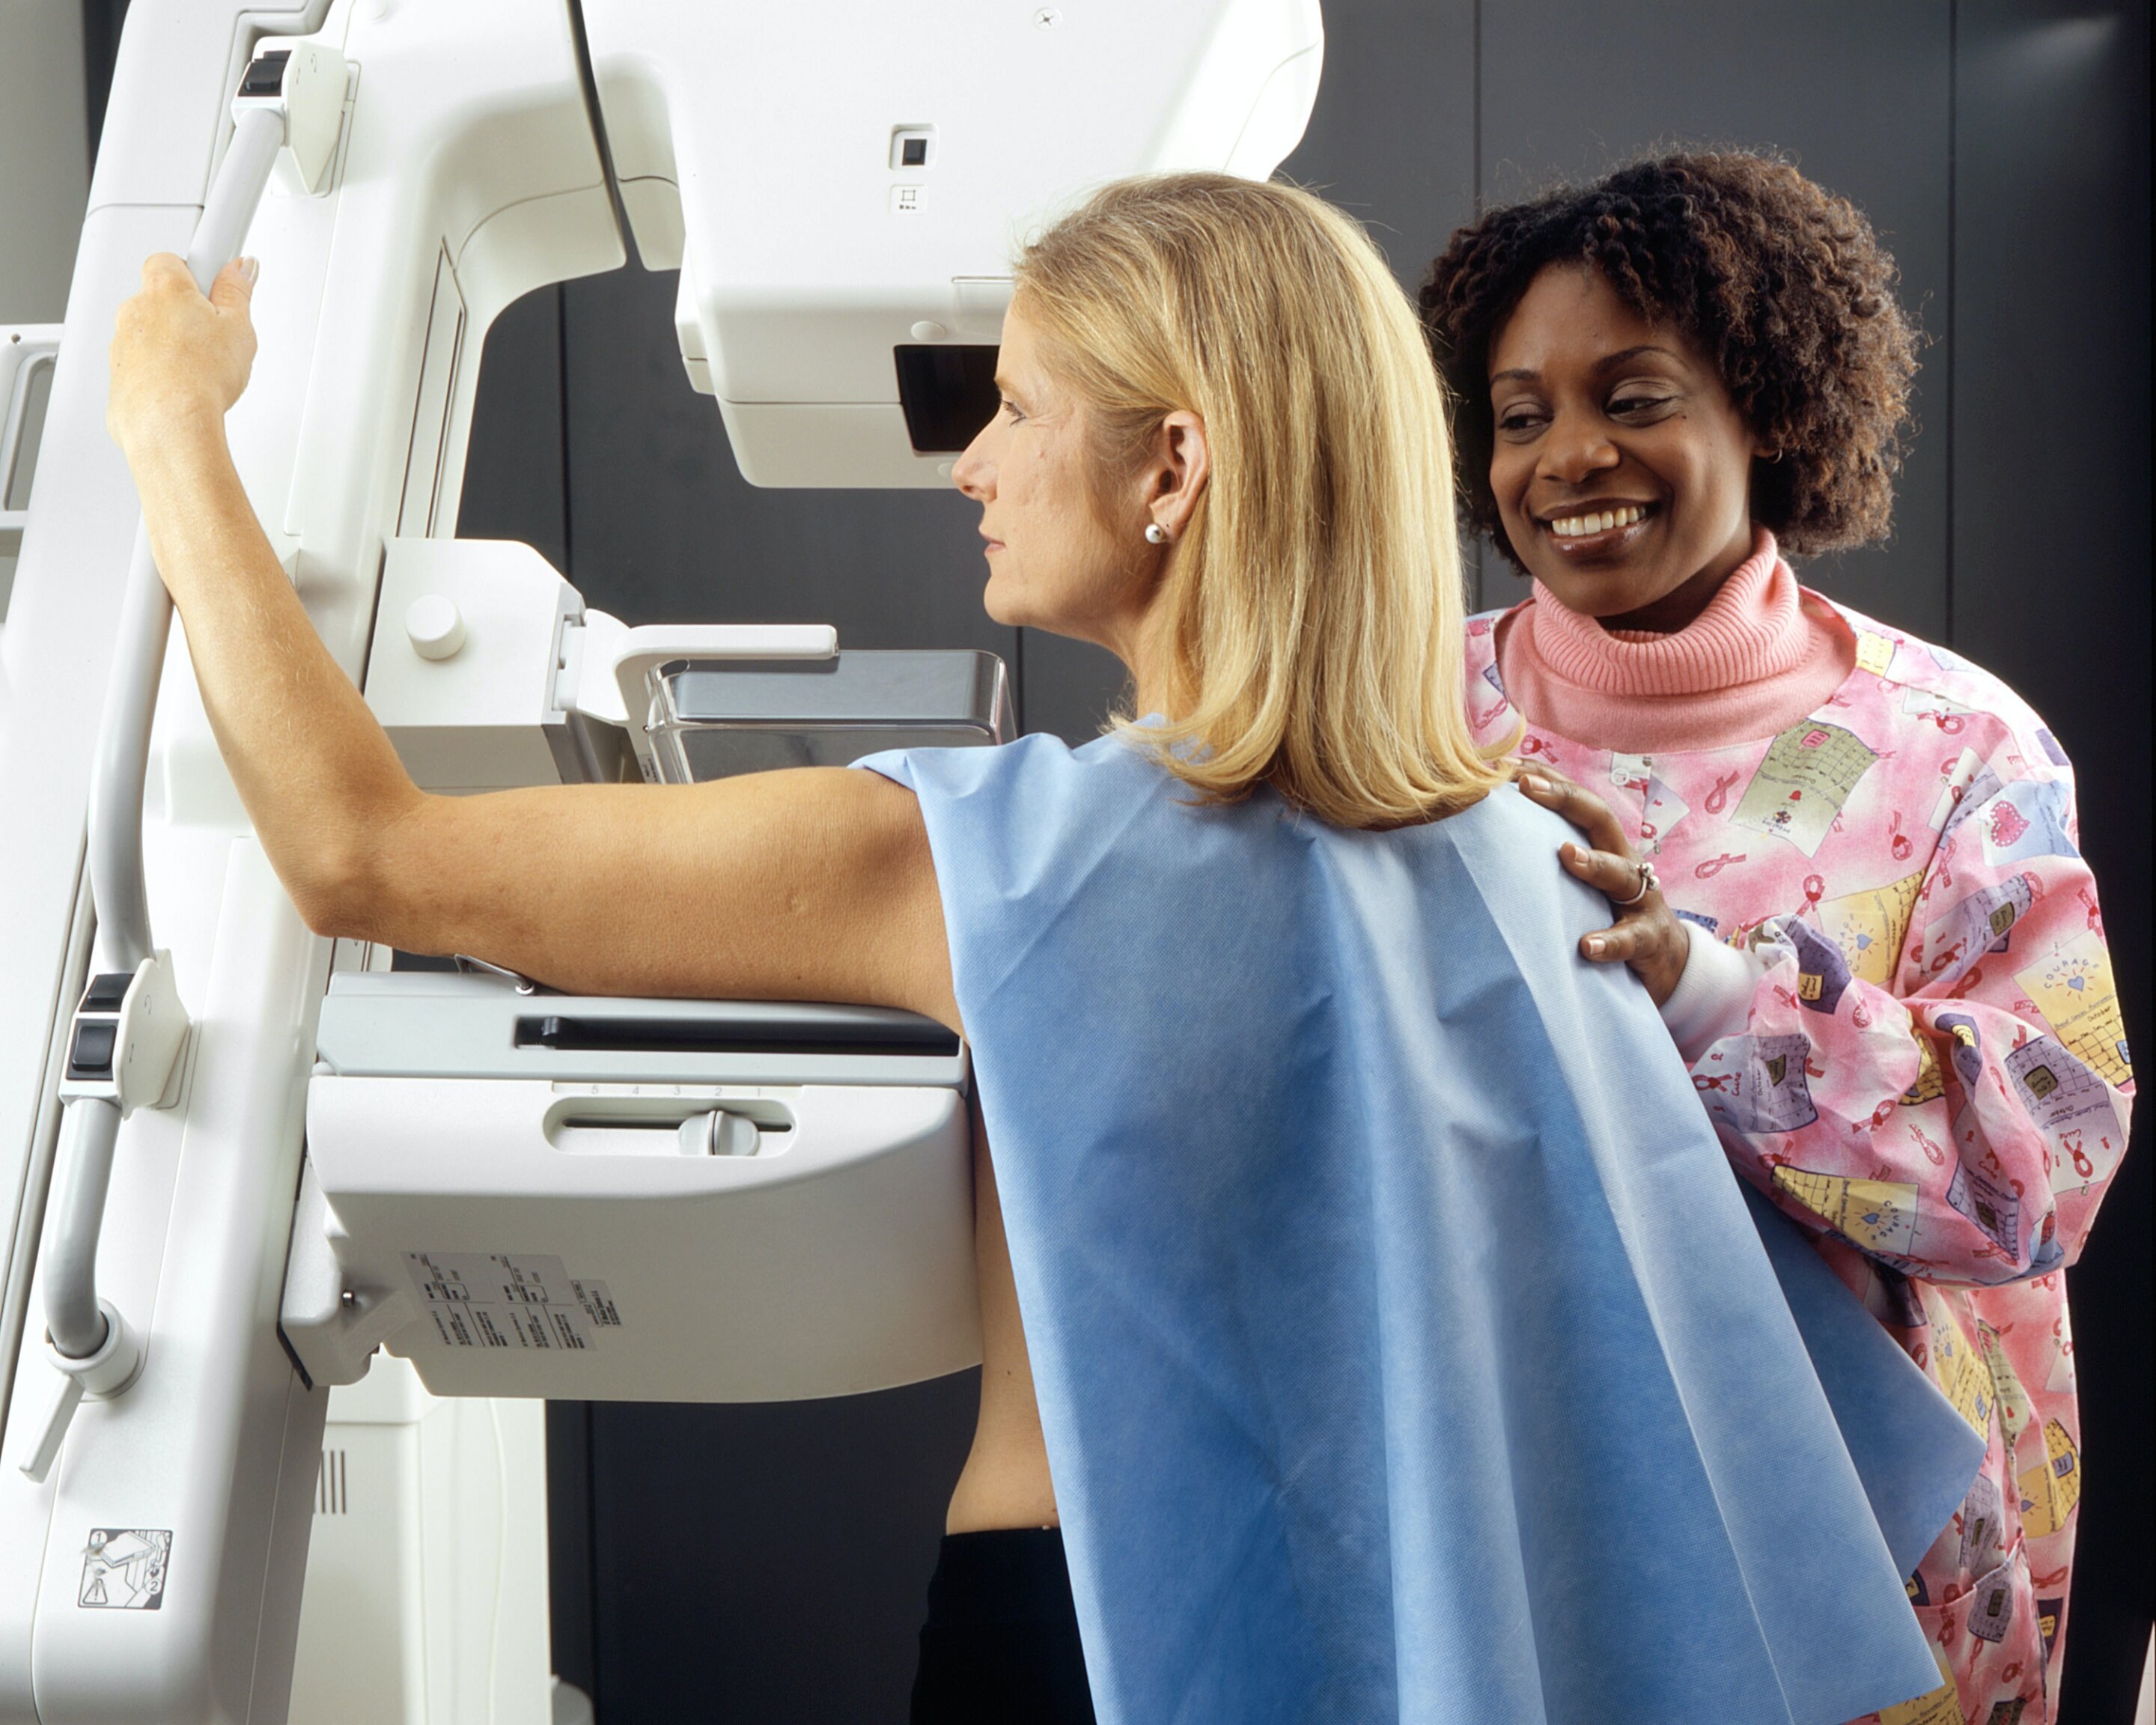 Skewed research results led to lack of access to mammography for women in their 40s, say researchers - Medical Xpress